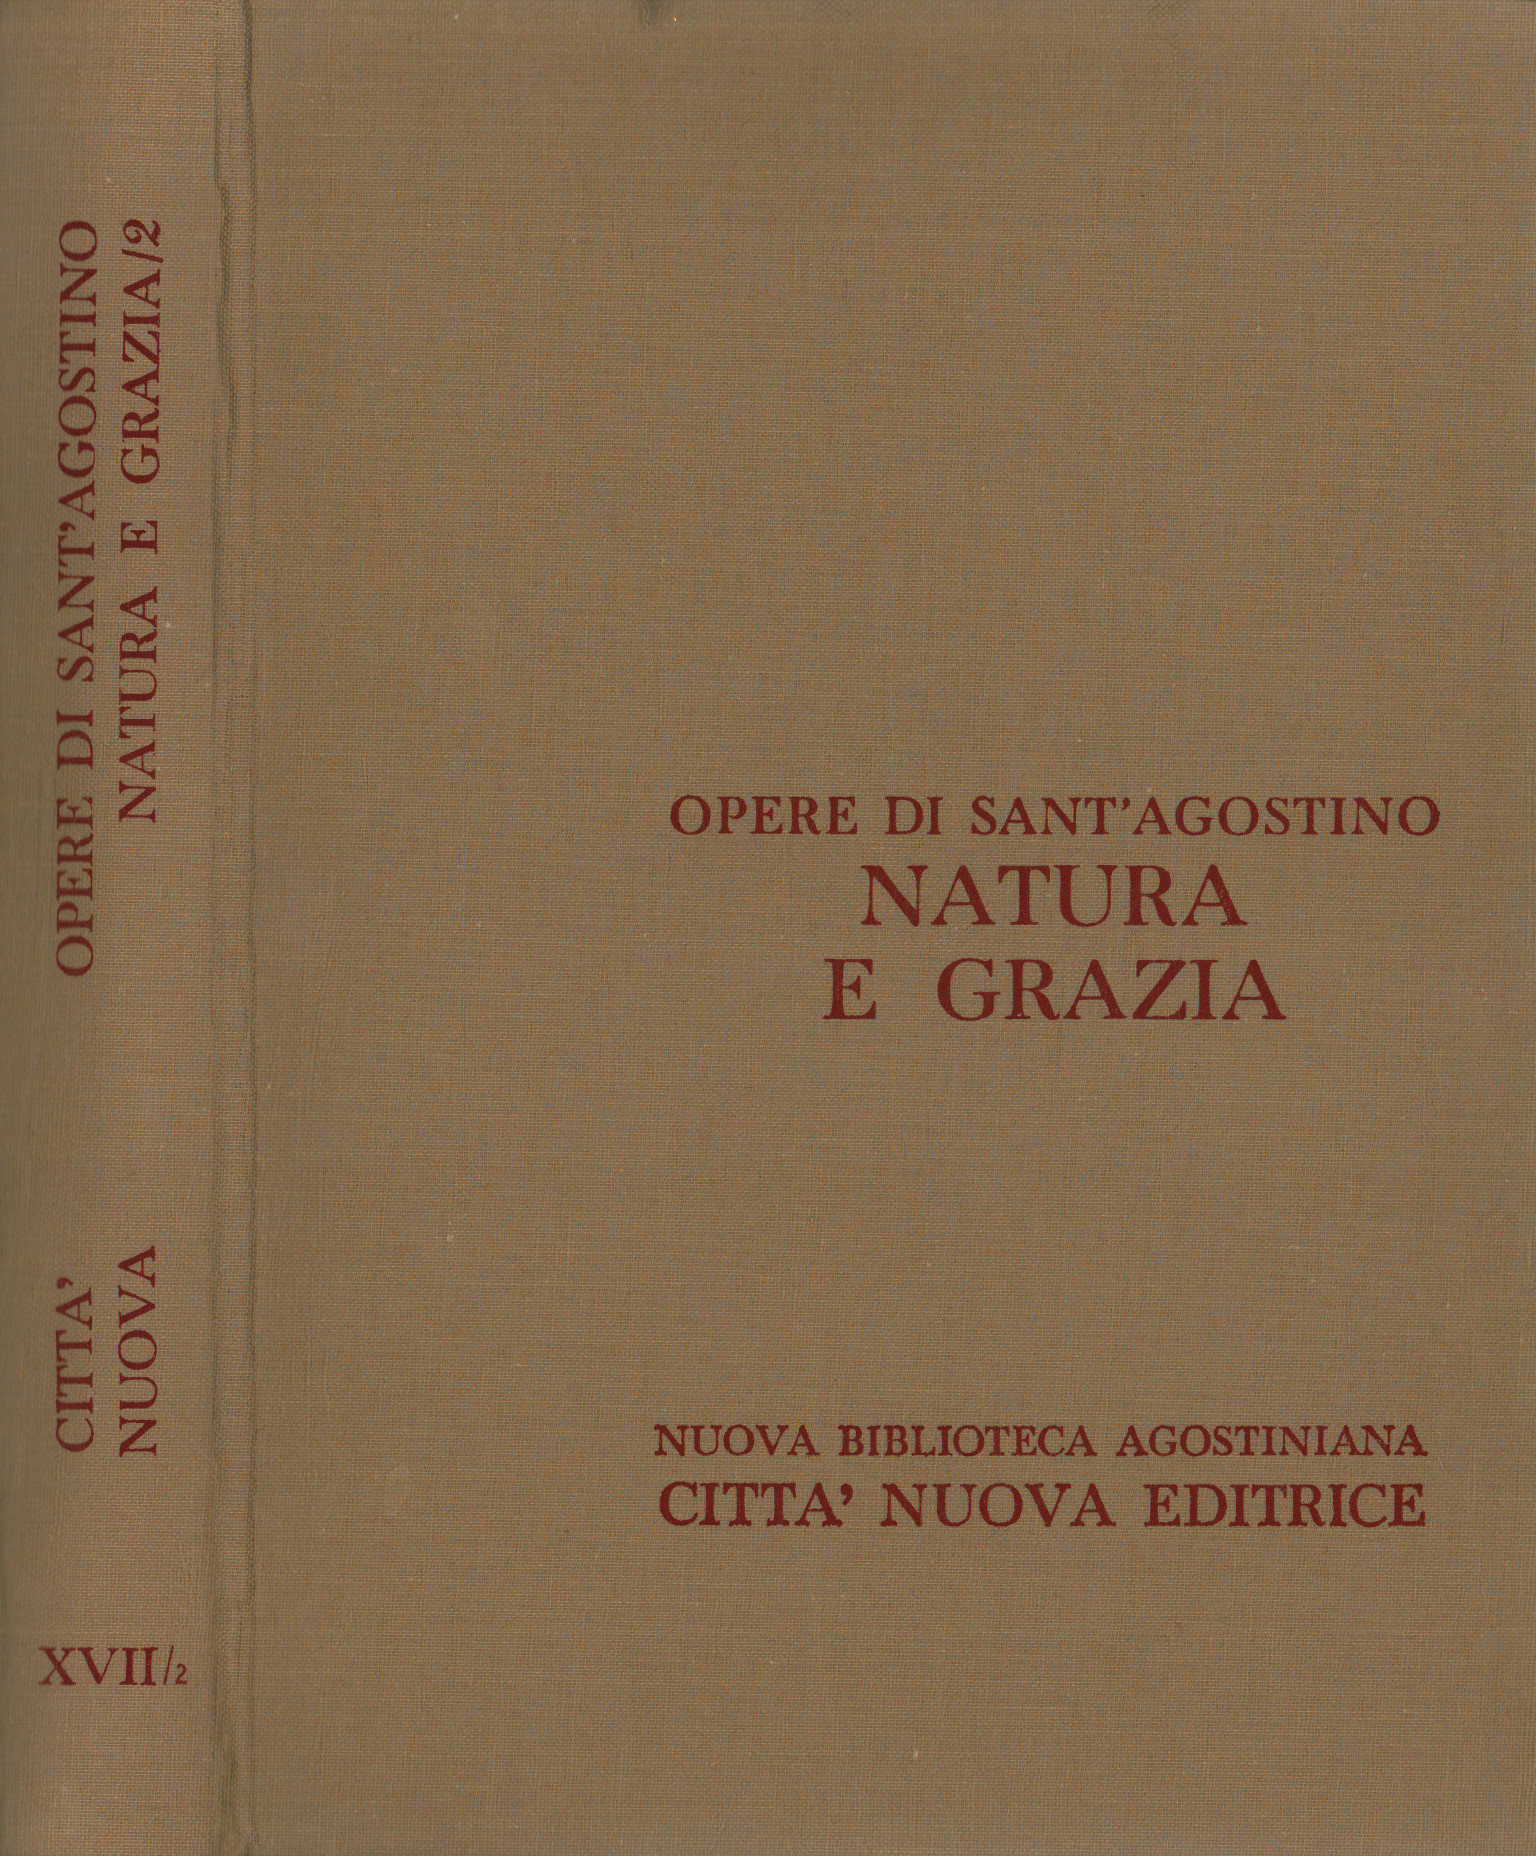 Works of Sant'Agostino. Nature